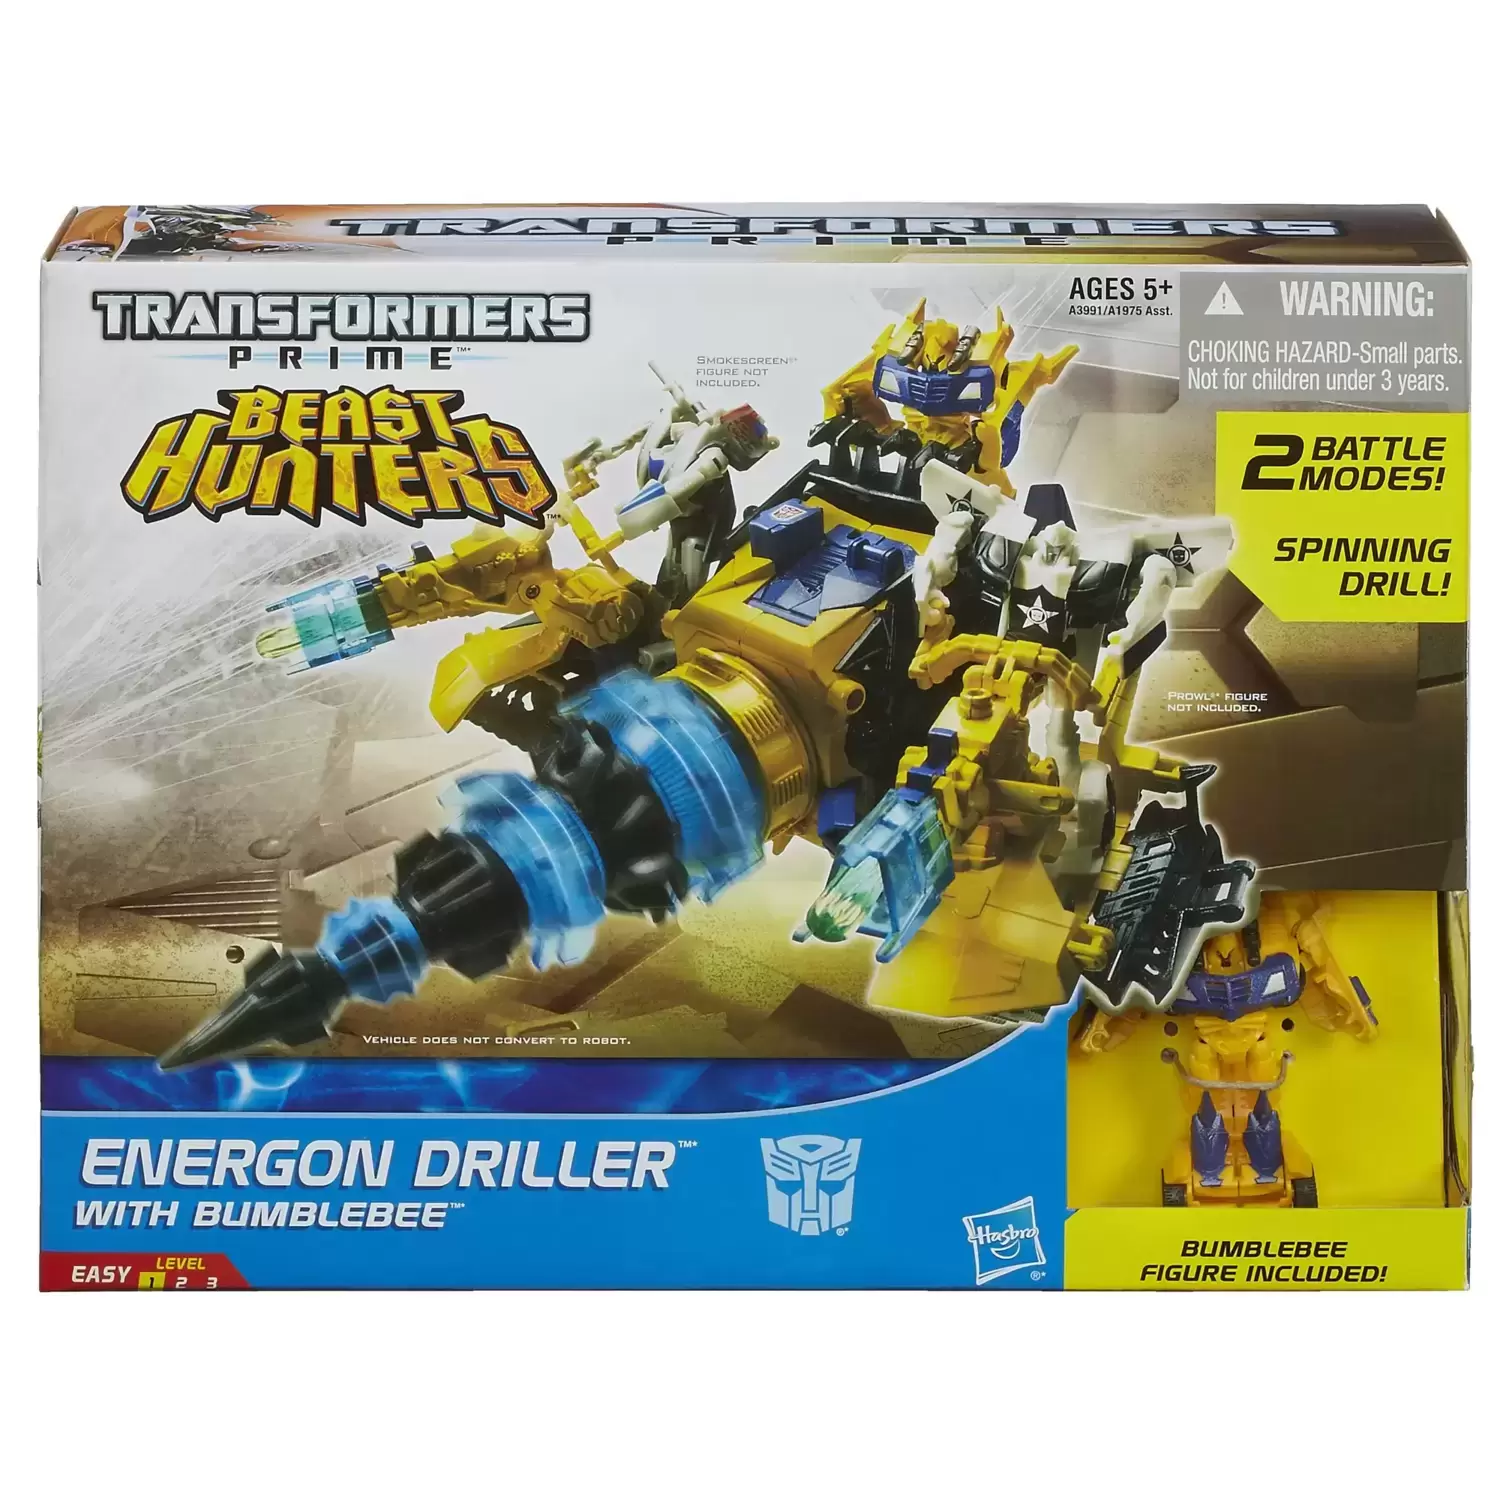 Transformers Prime Beast Hunters - Energon Driller with Bumblebee